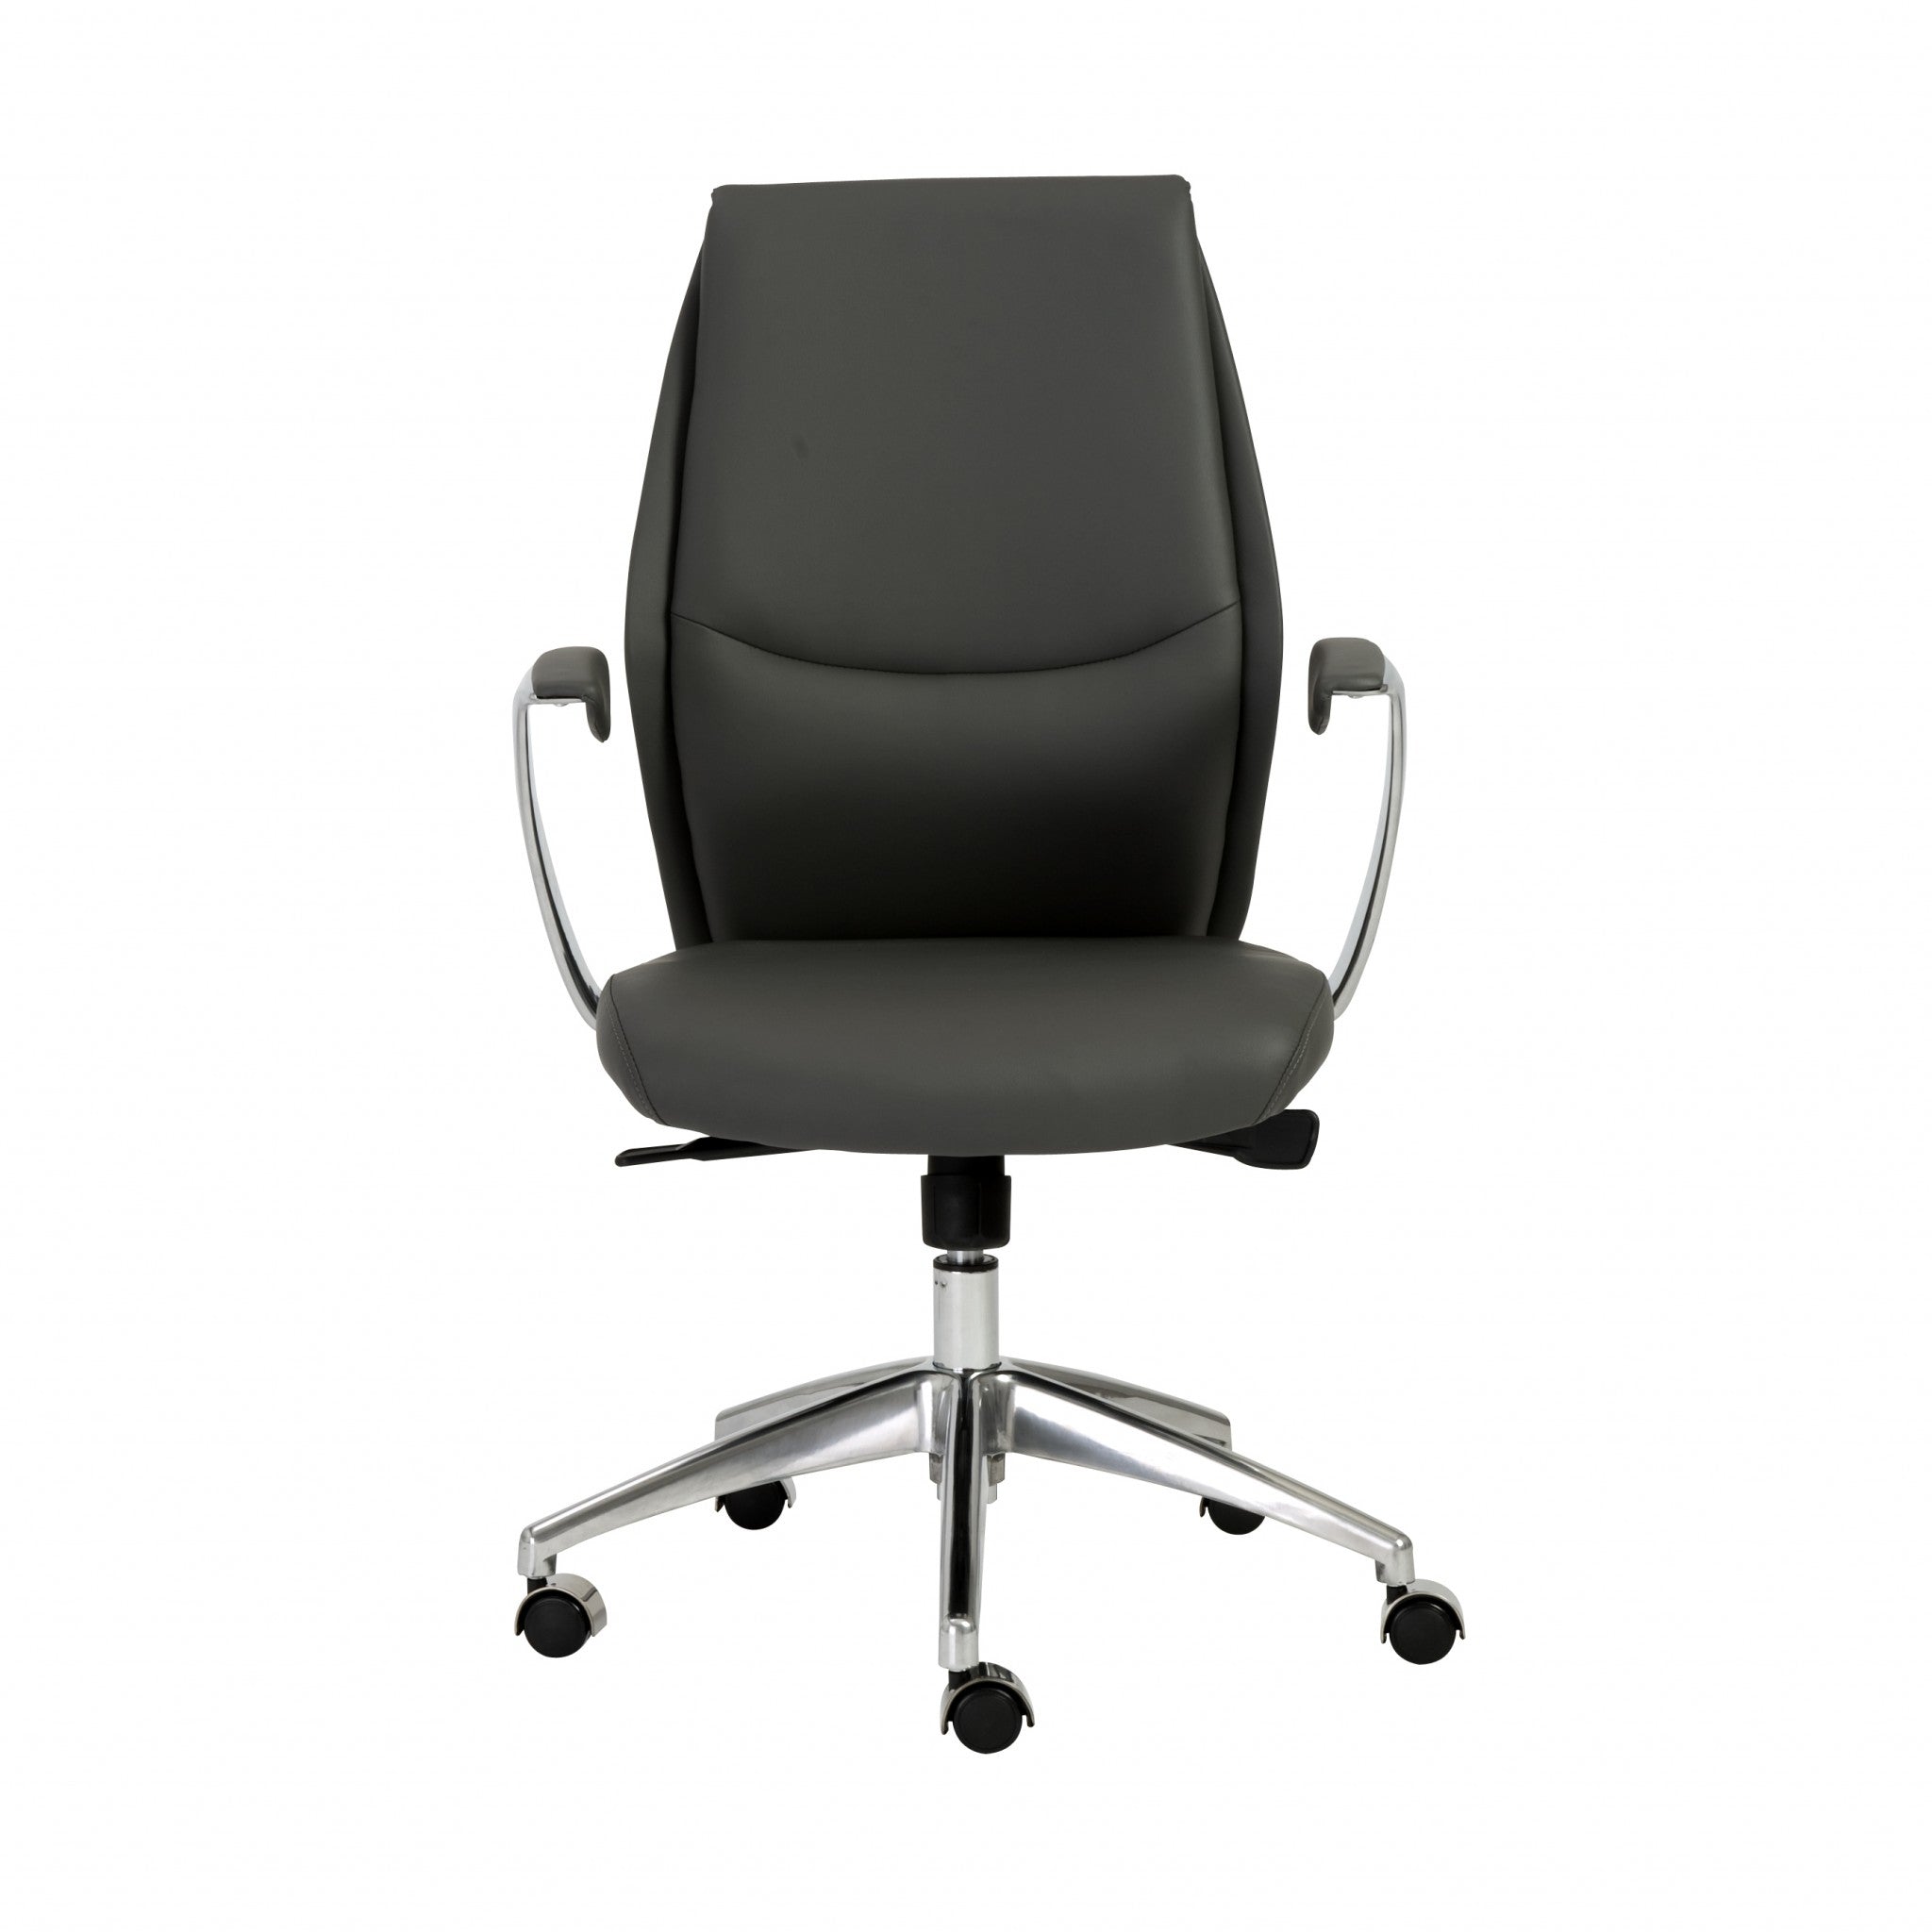 Gray-Faux-Leather-Seat-Swivel-Adjustable-Task-Chair-Leather-Back-Steel-Frame-Office-Chairs